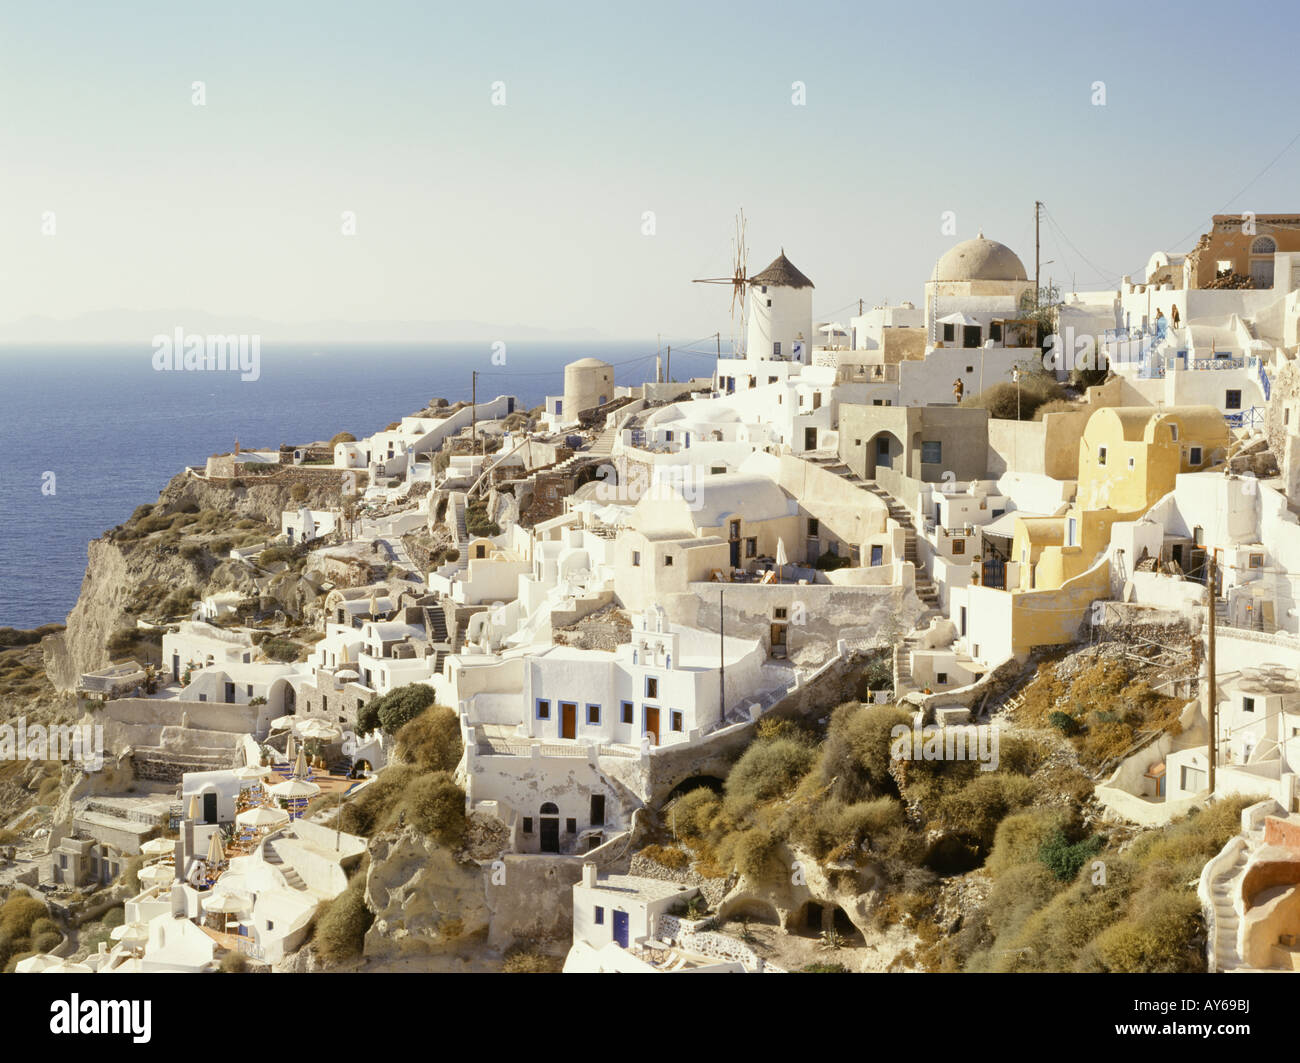 Cyclades Islands. View of white buildings of town perched on hill. Church. Windmill. Distinctive domed roofs. Sea. Stock Photo